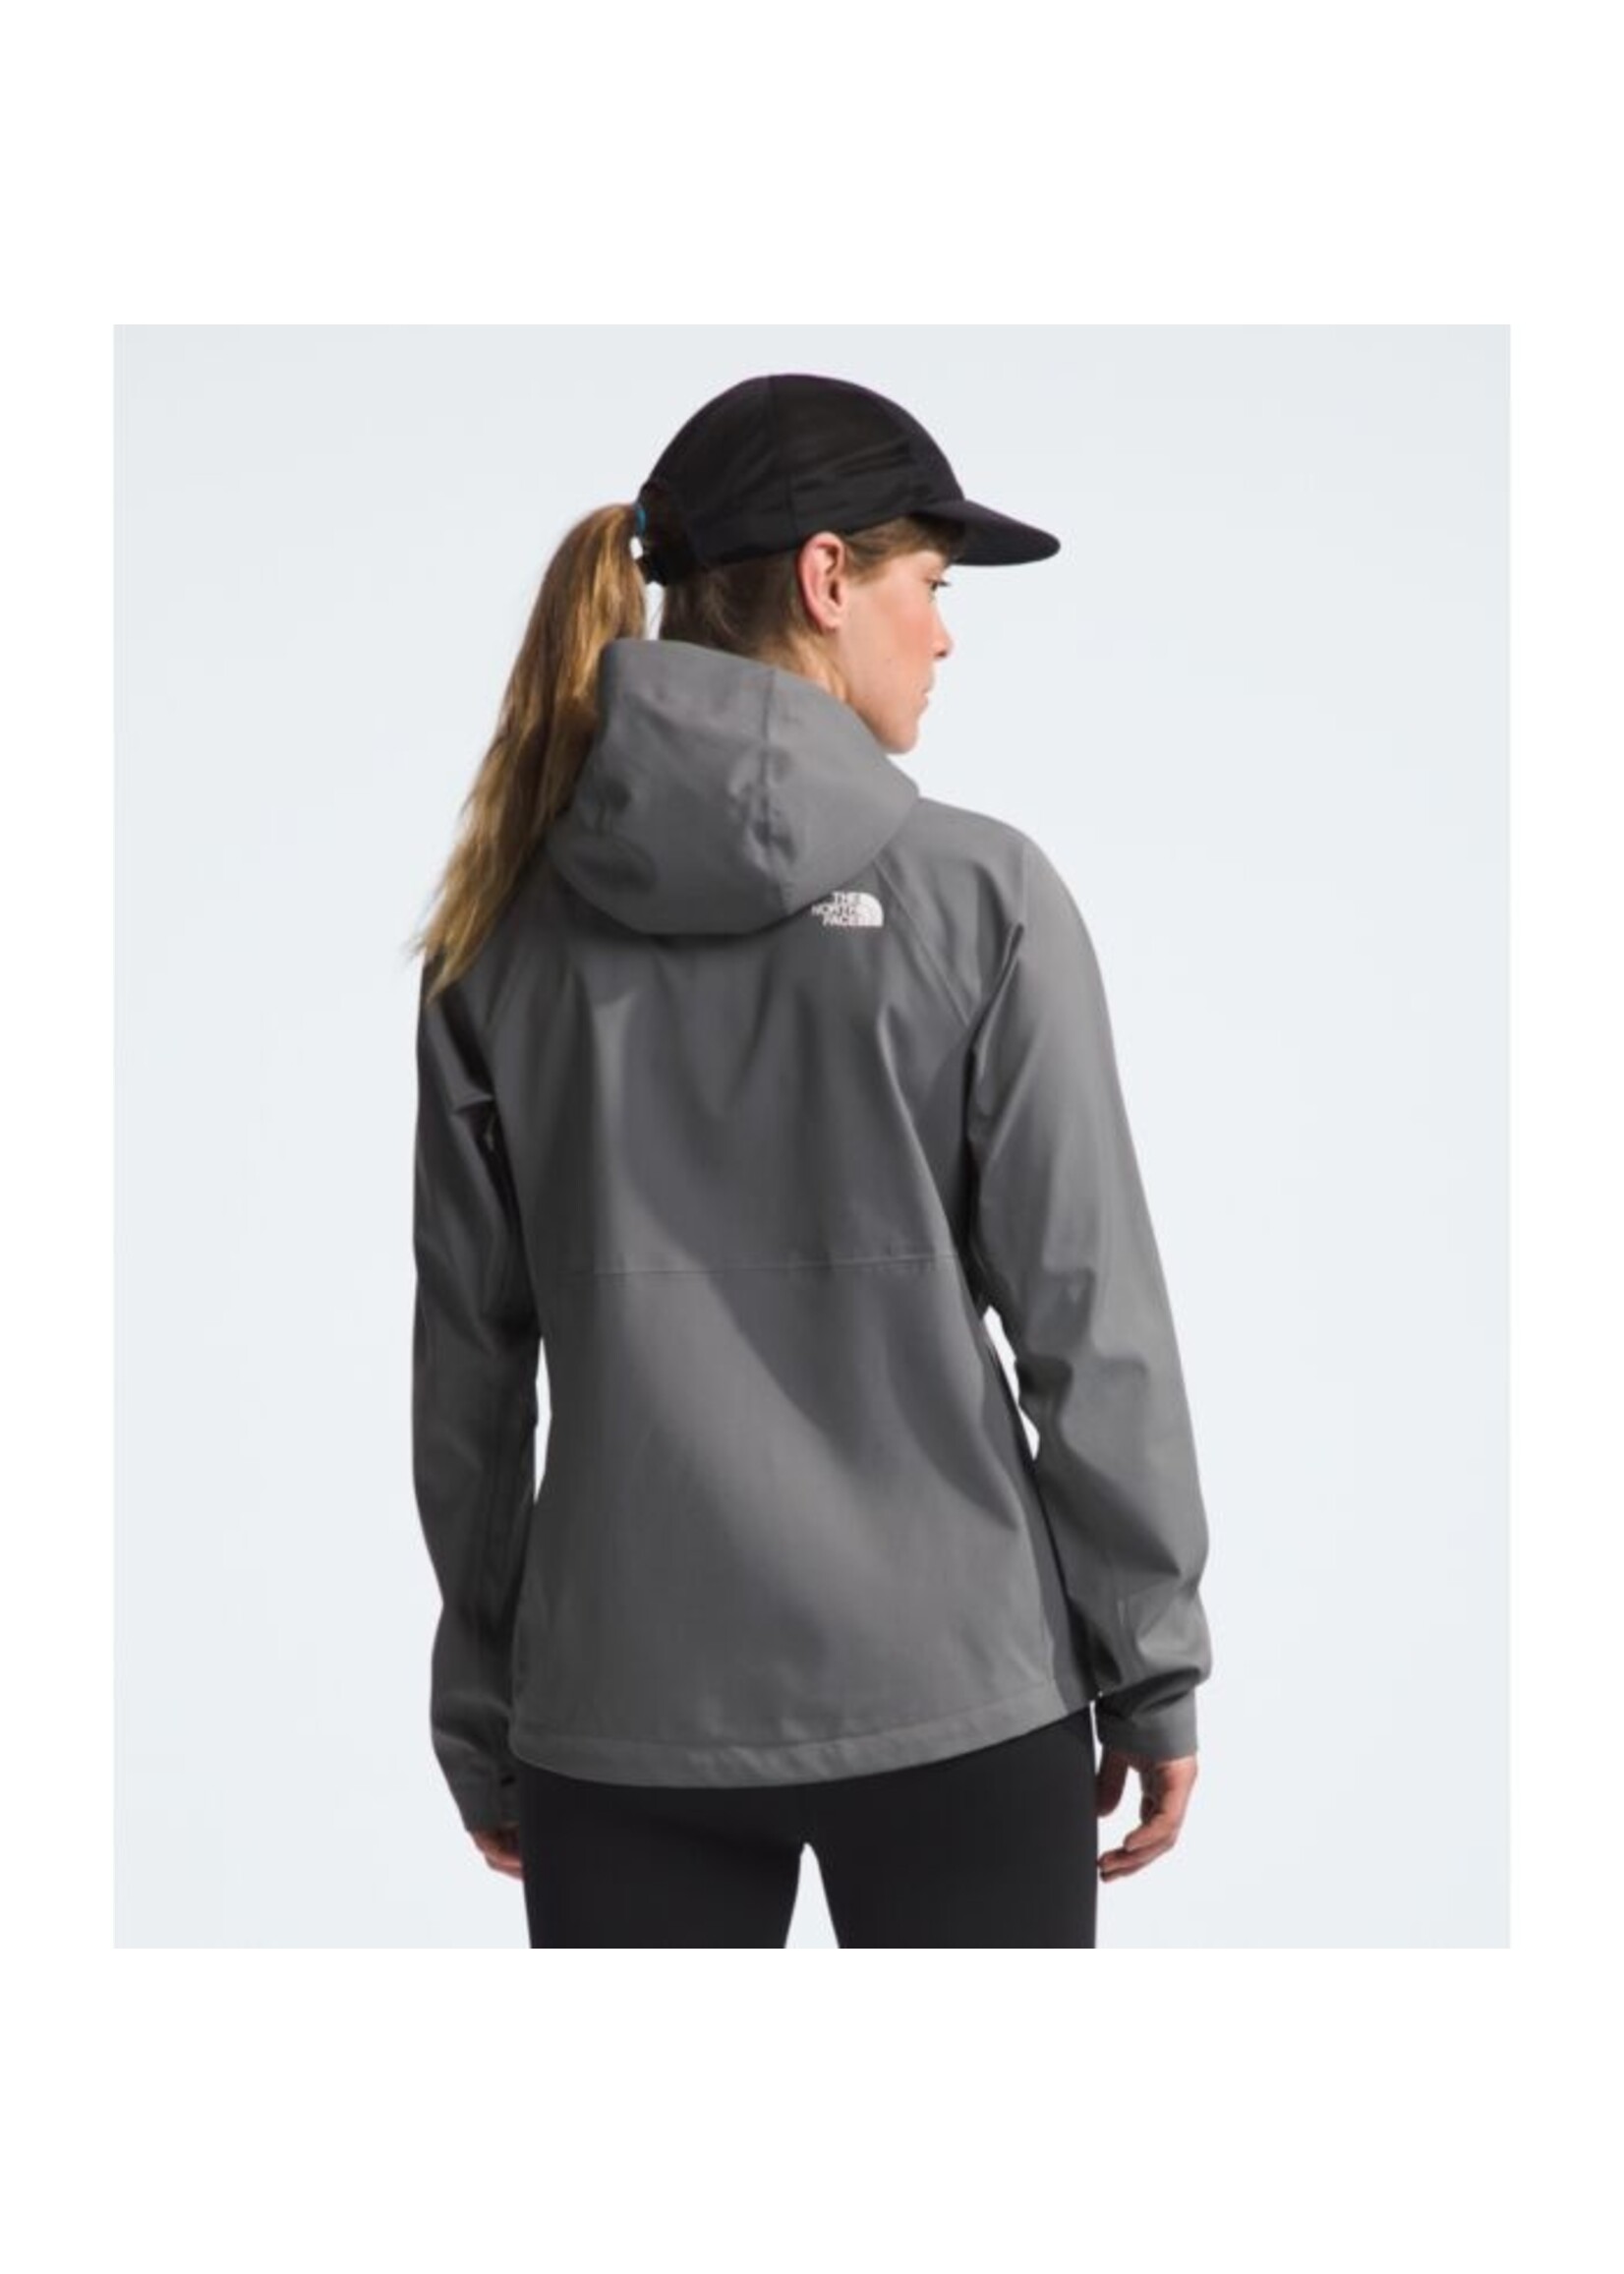 North Face North Face W's Valle Vista Stretch Jacket